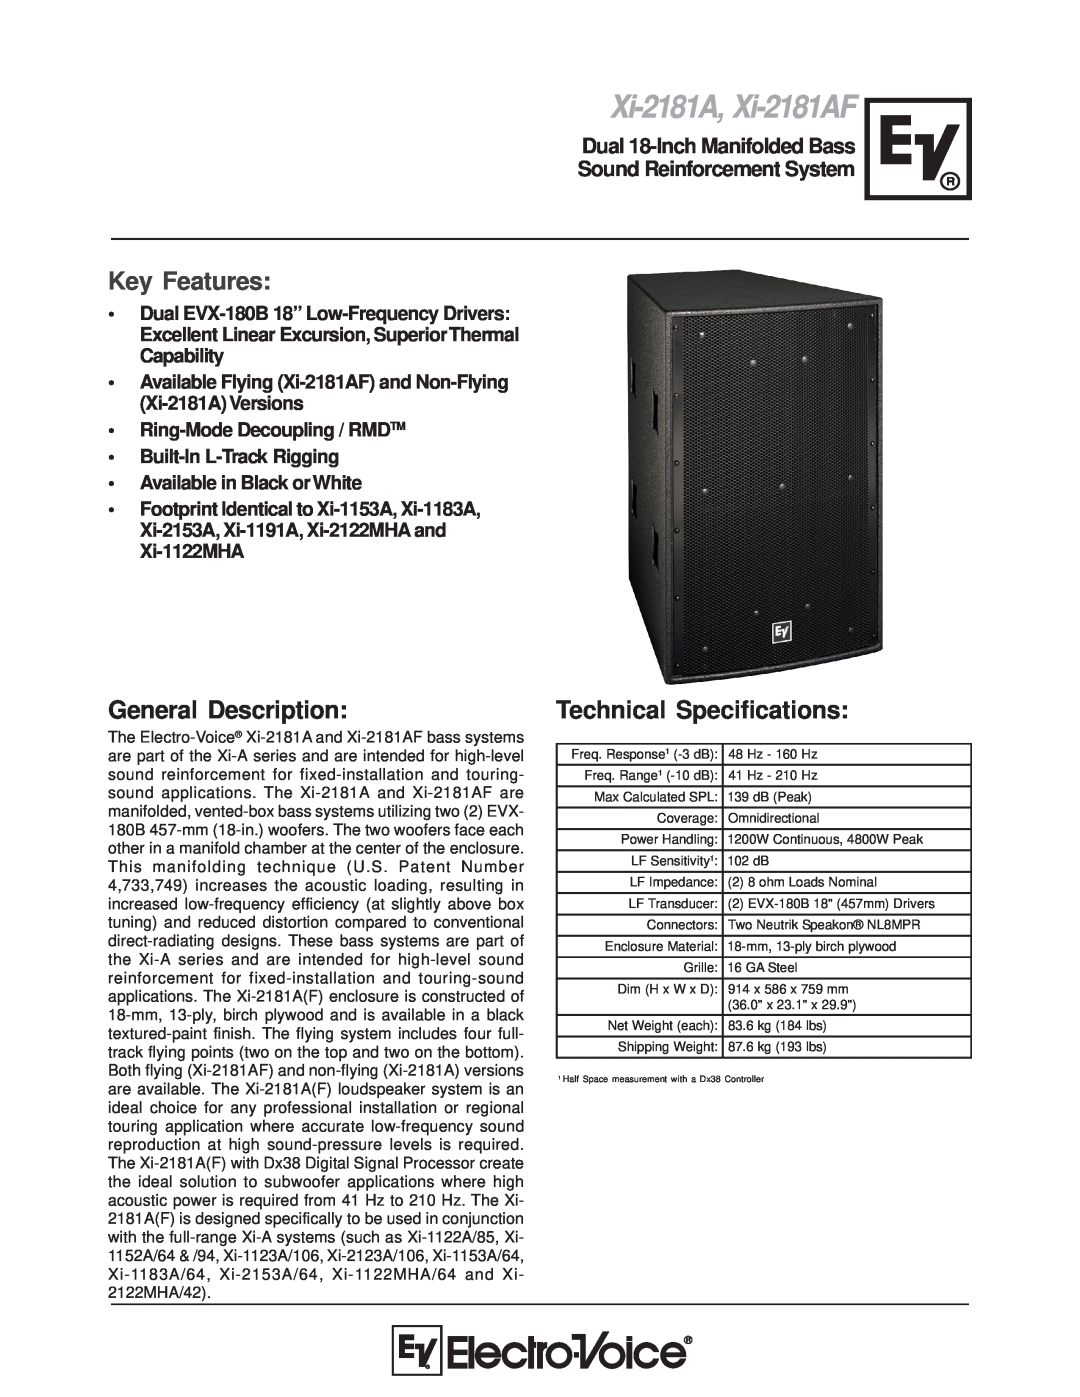 Electro-Voice XI-2181A technical specifications General Description, Technical Specifications, Xi-2181A, Xi-2181AF 